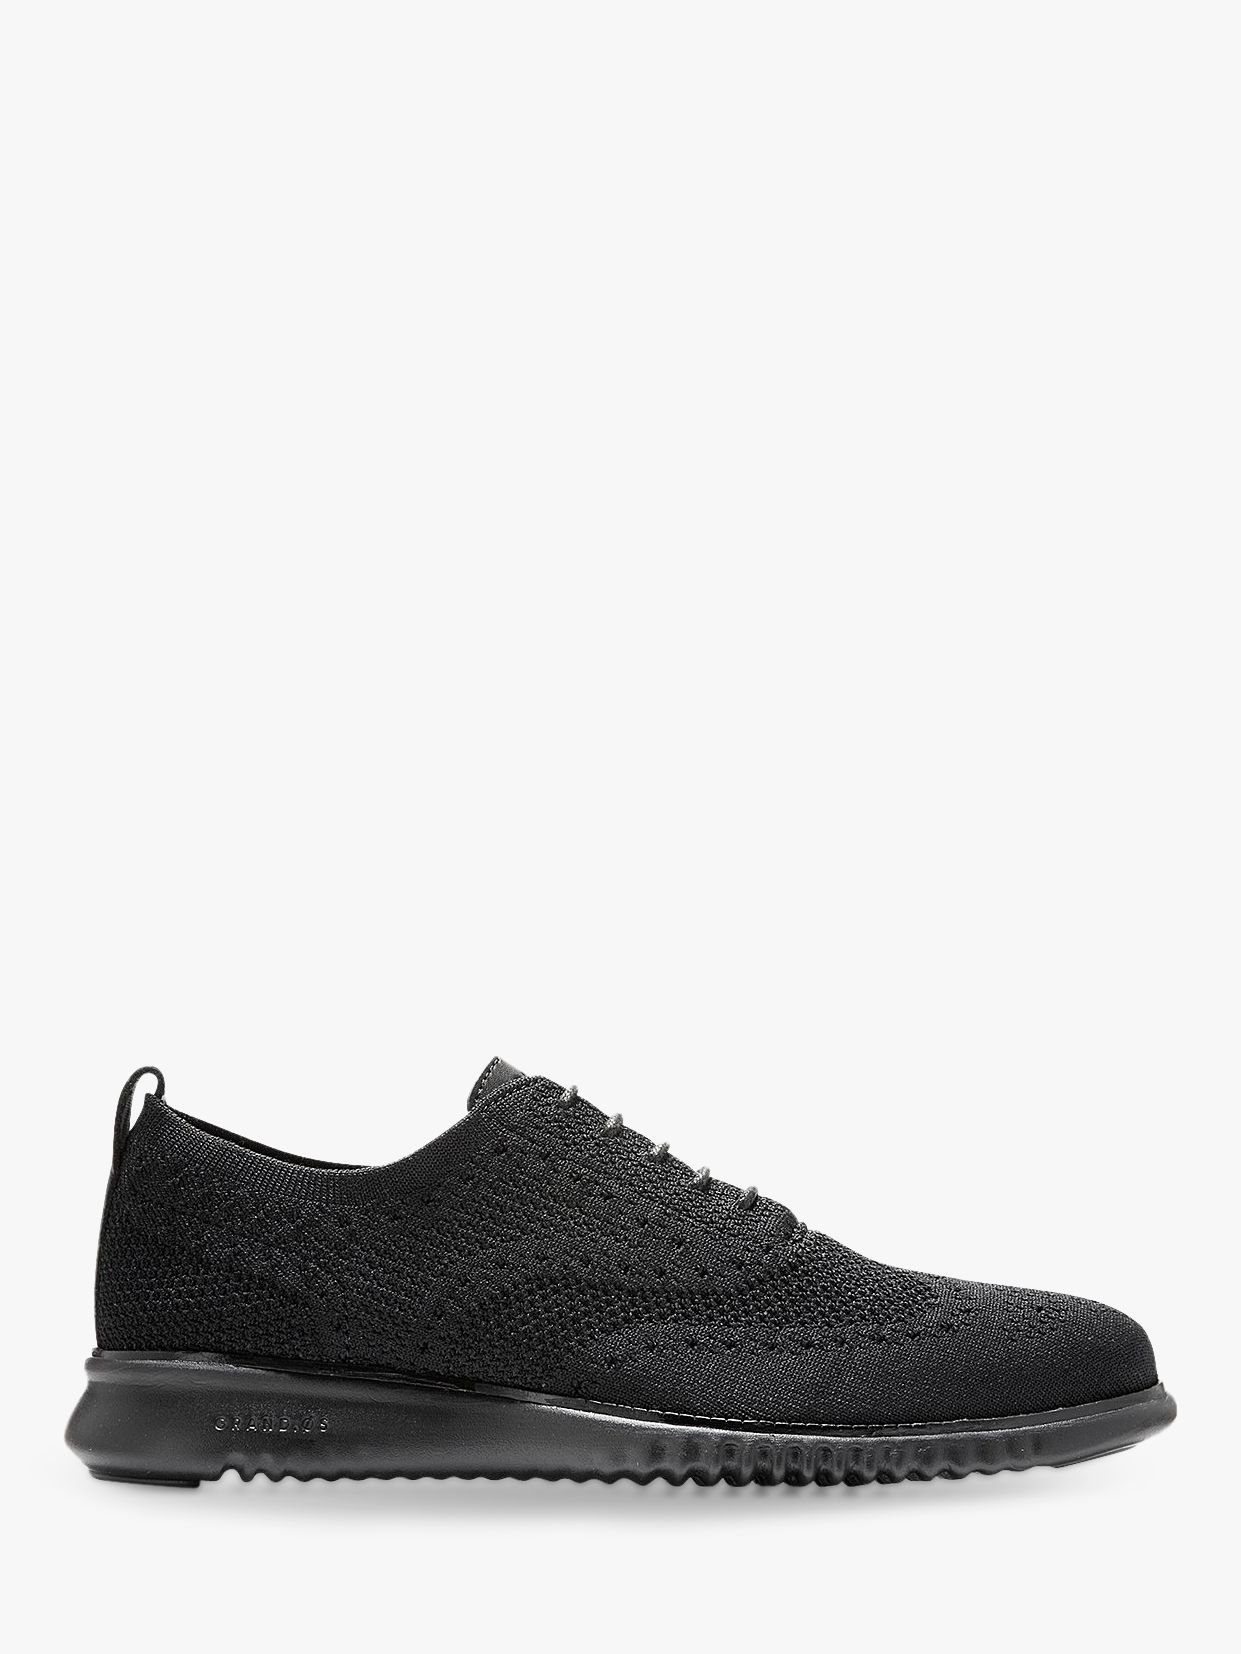 Cole Haan Zerogrand Stitchlite Knitted Oxford Shoes, Black